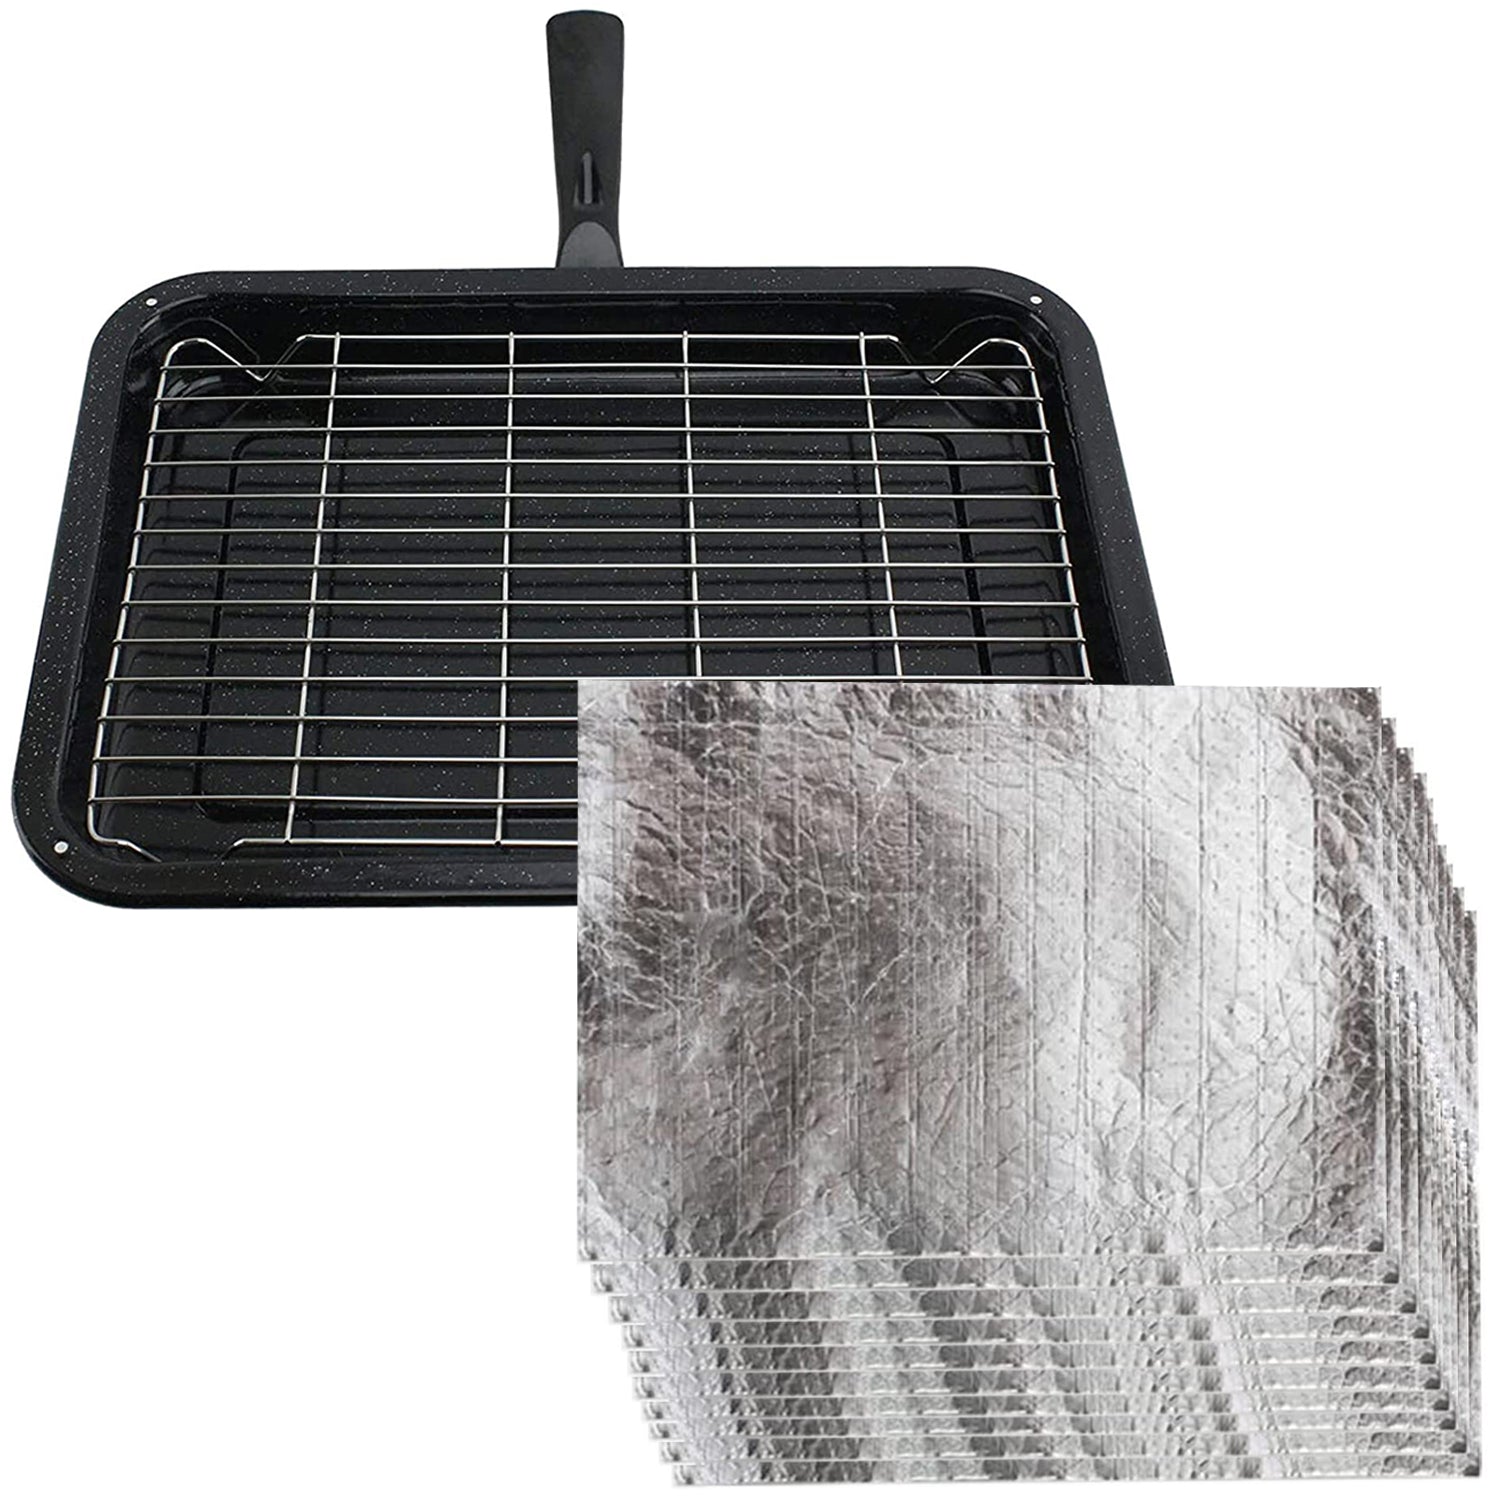 UNIVERSAL Small Grill Pan Rack and Detachable Handle for Oven Cooker + 10 Protective Fat/Grease Absorbent Foil Pads